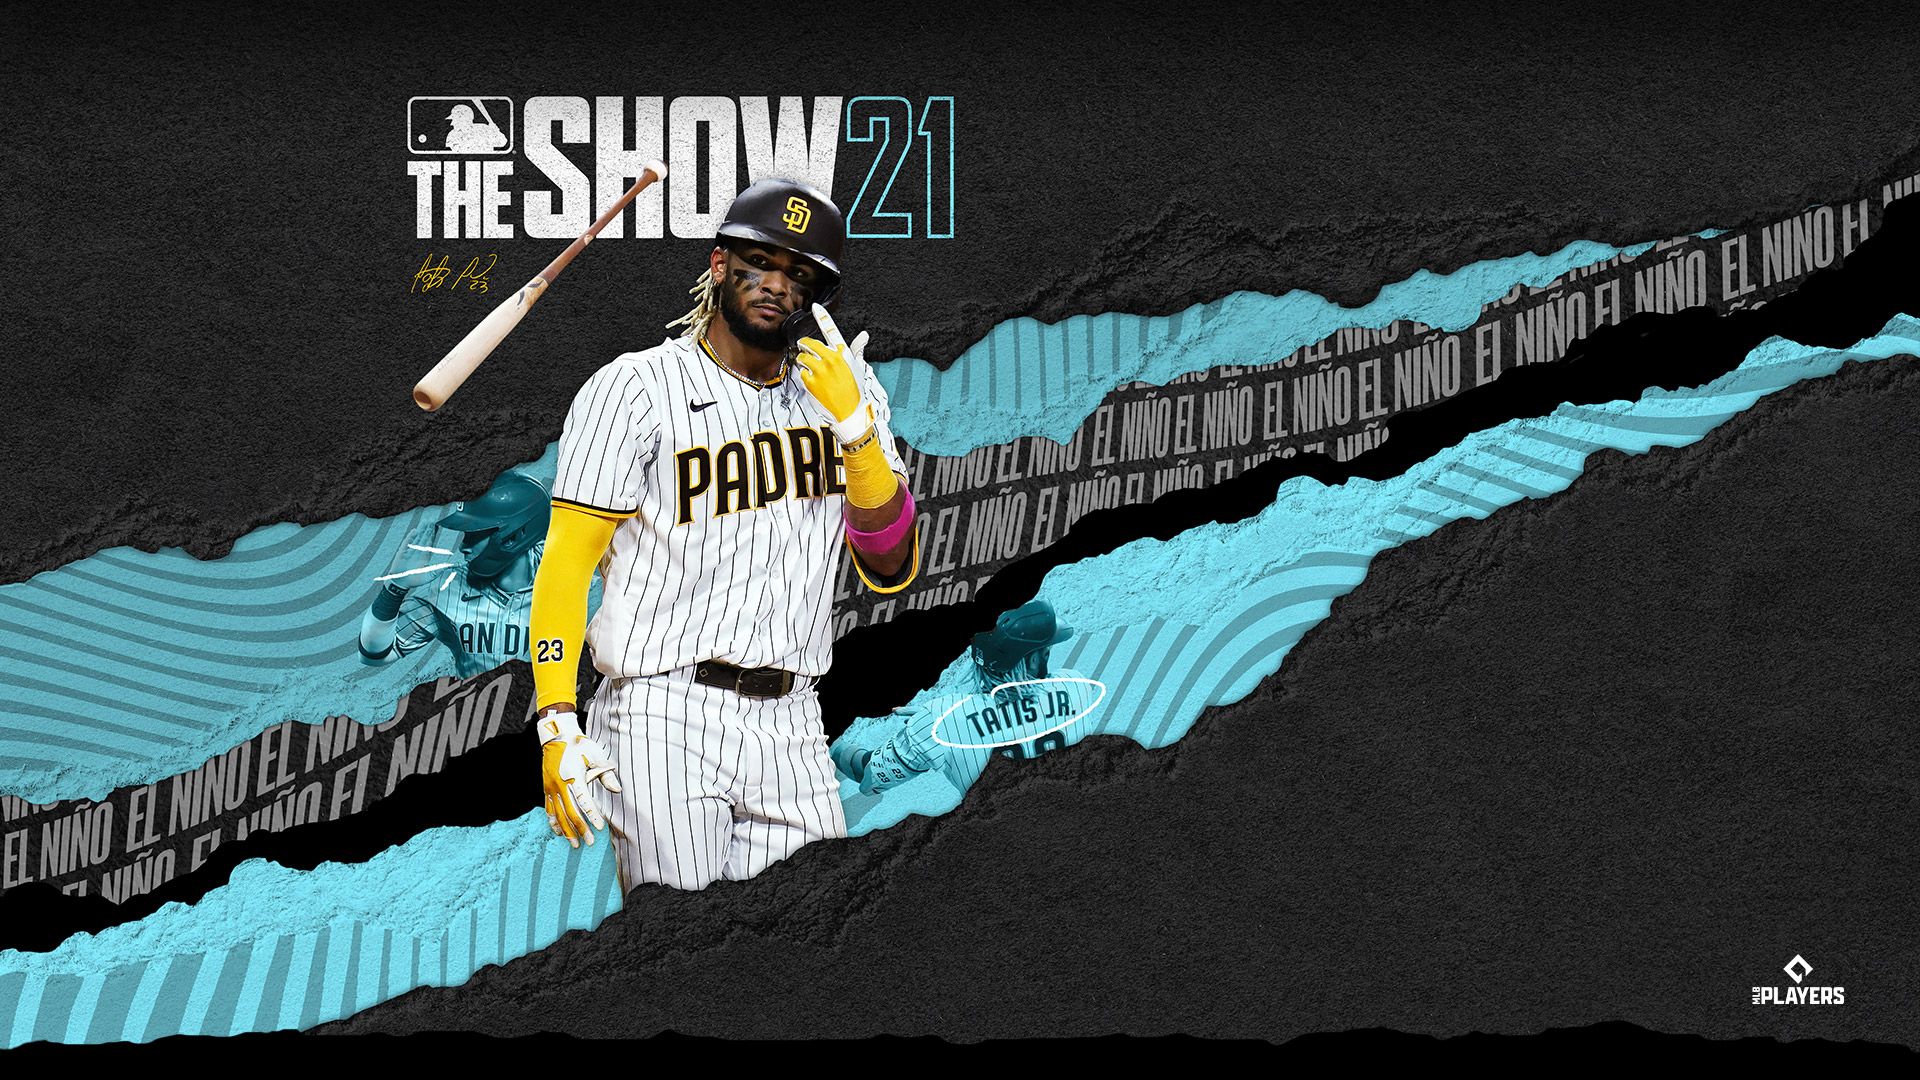 MLB The Show 21 Wallpapers - Wallpaper Cave.